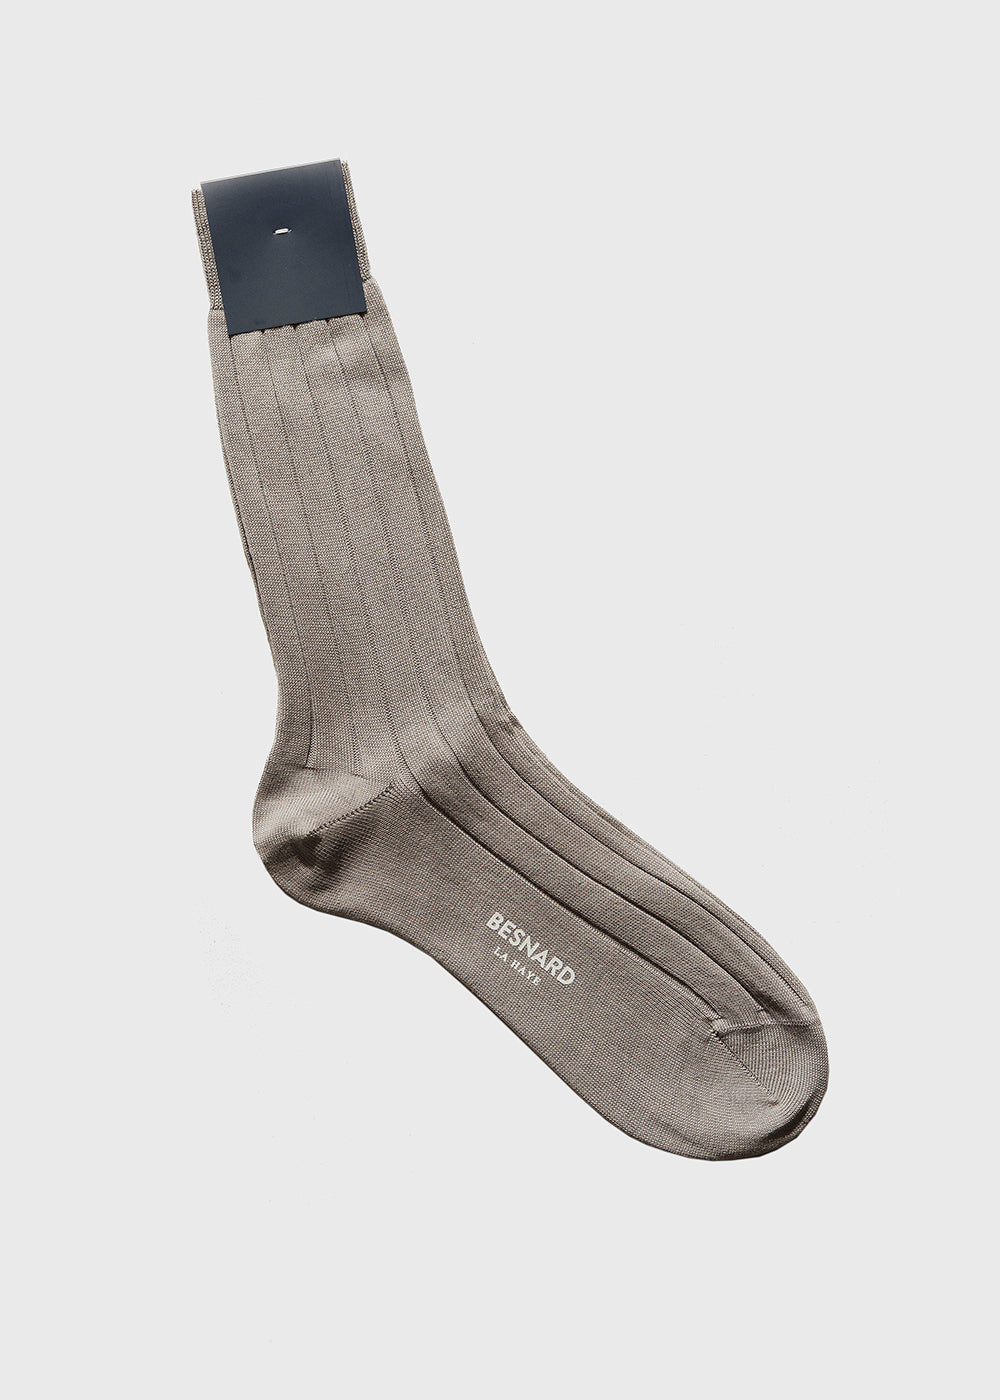 Wide Rib Socks in Taupe Cotton